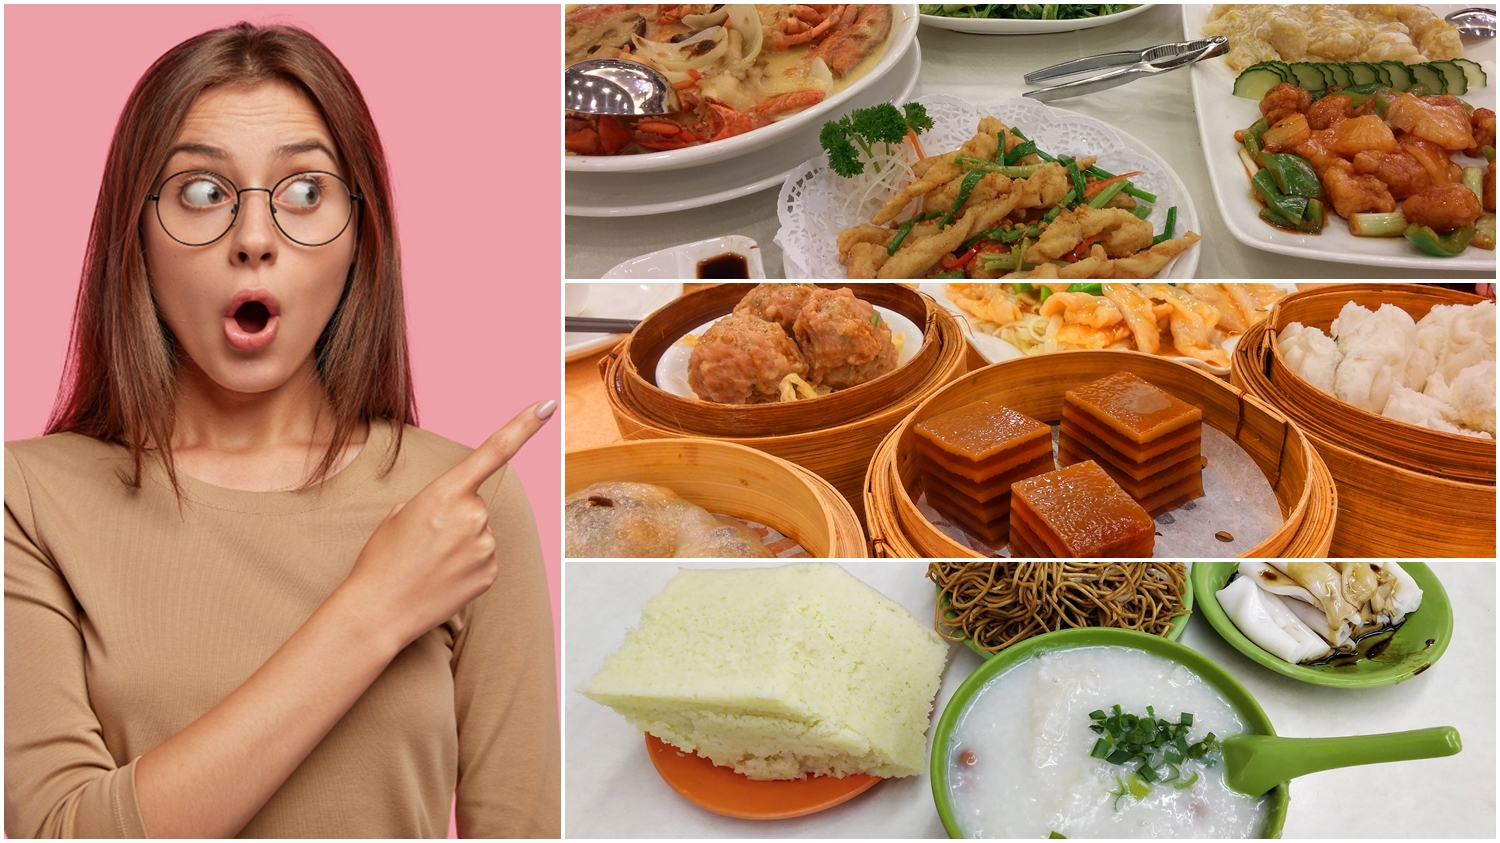 Solo travelers don't need to order too much food in Hong Kong's restaurants